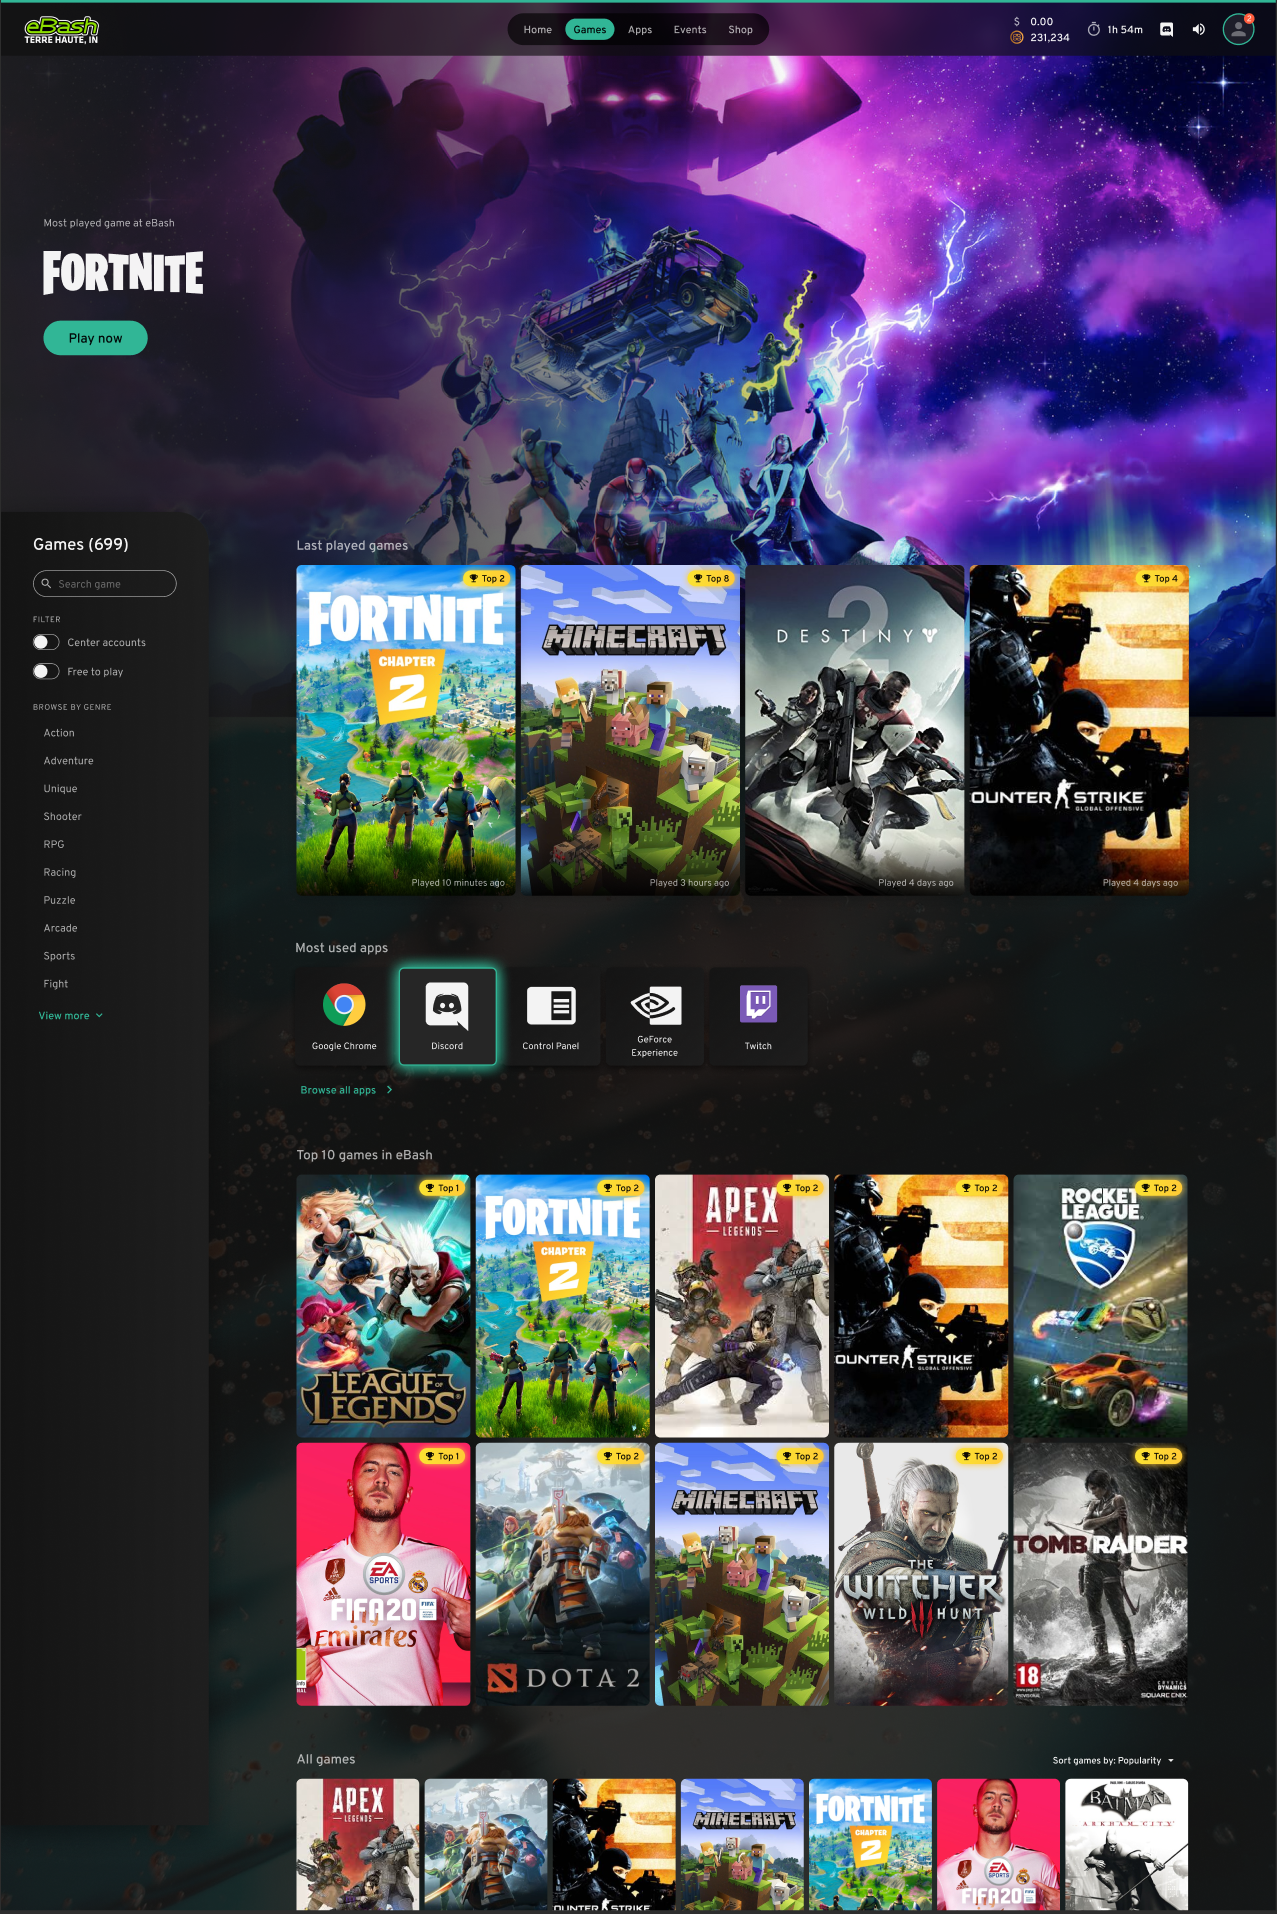 Users will now be able to quickly find games by filtering the catalog